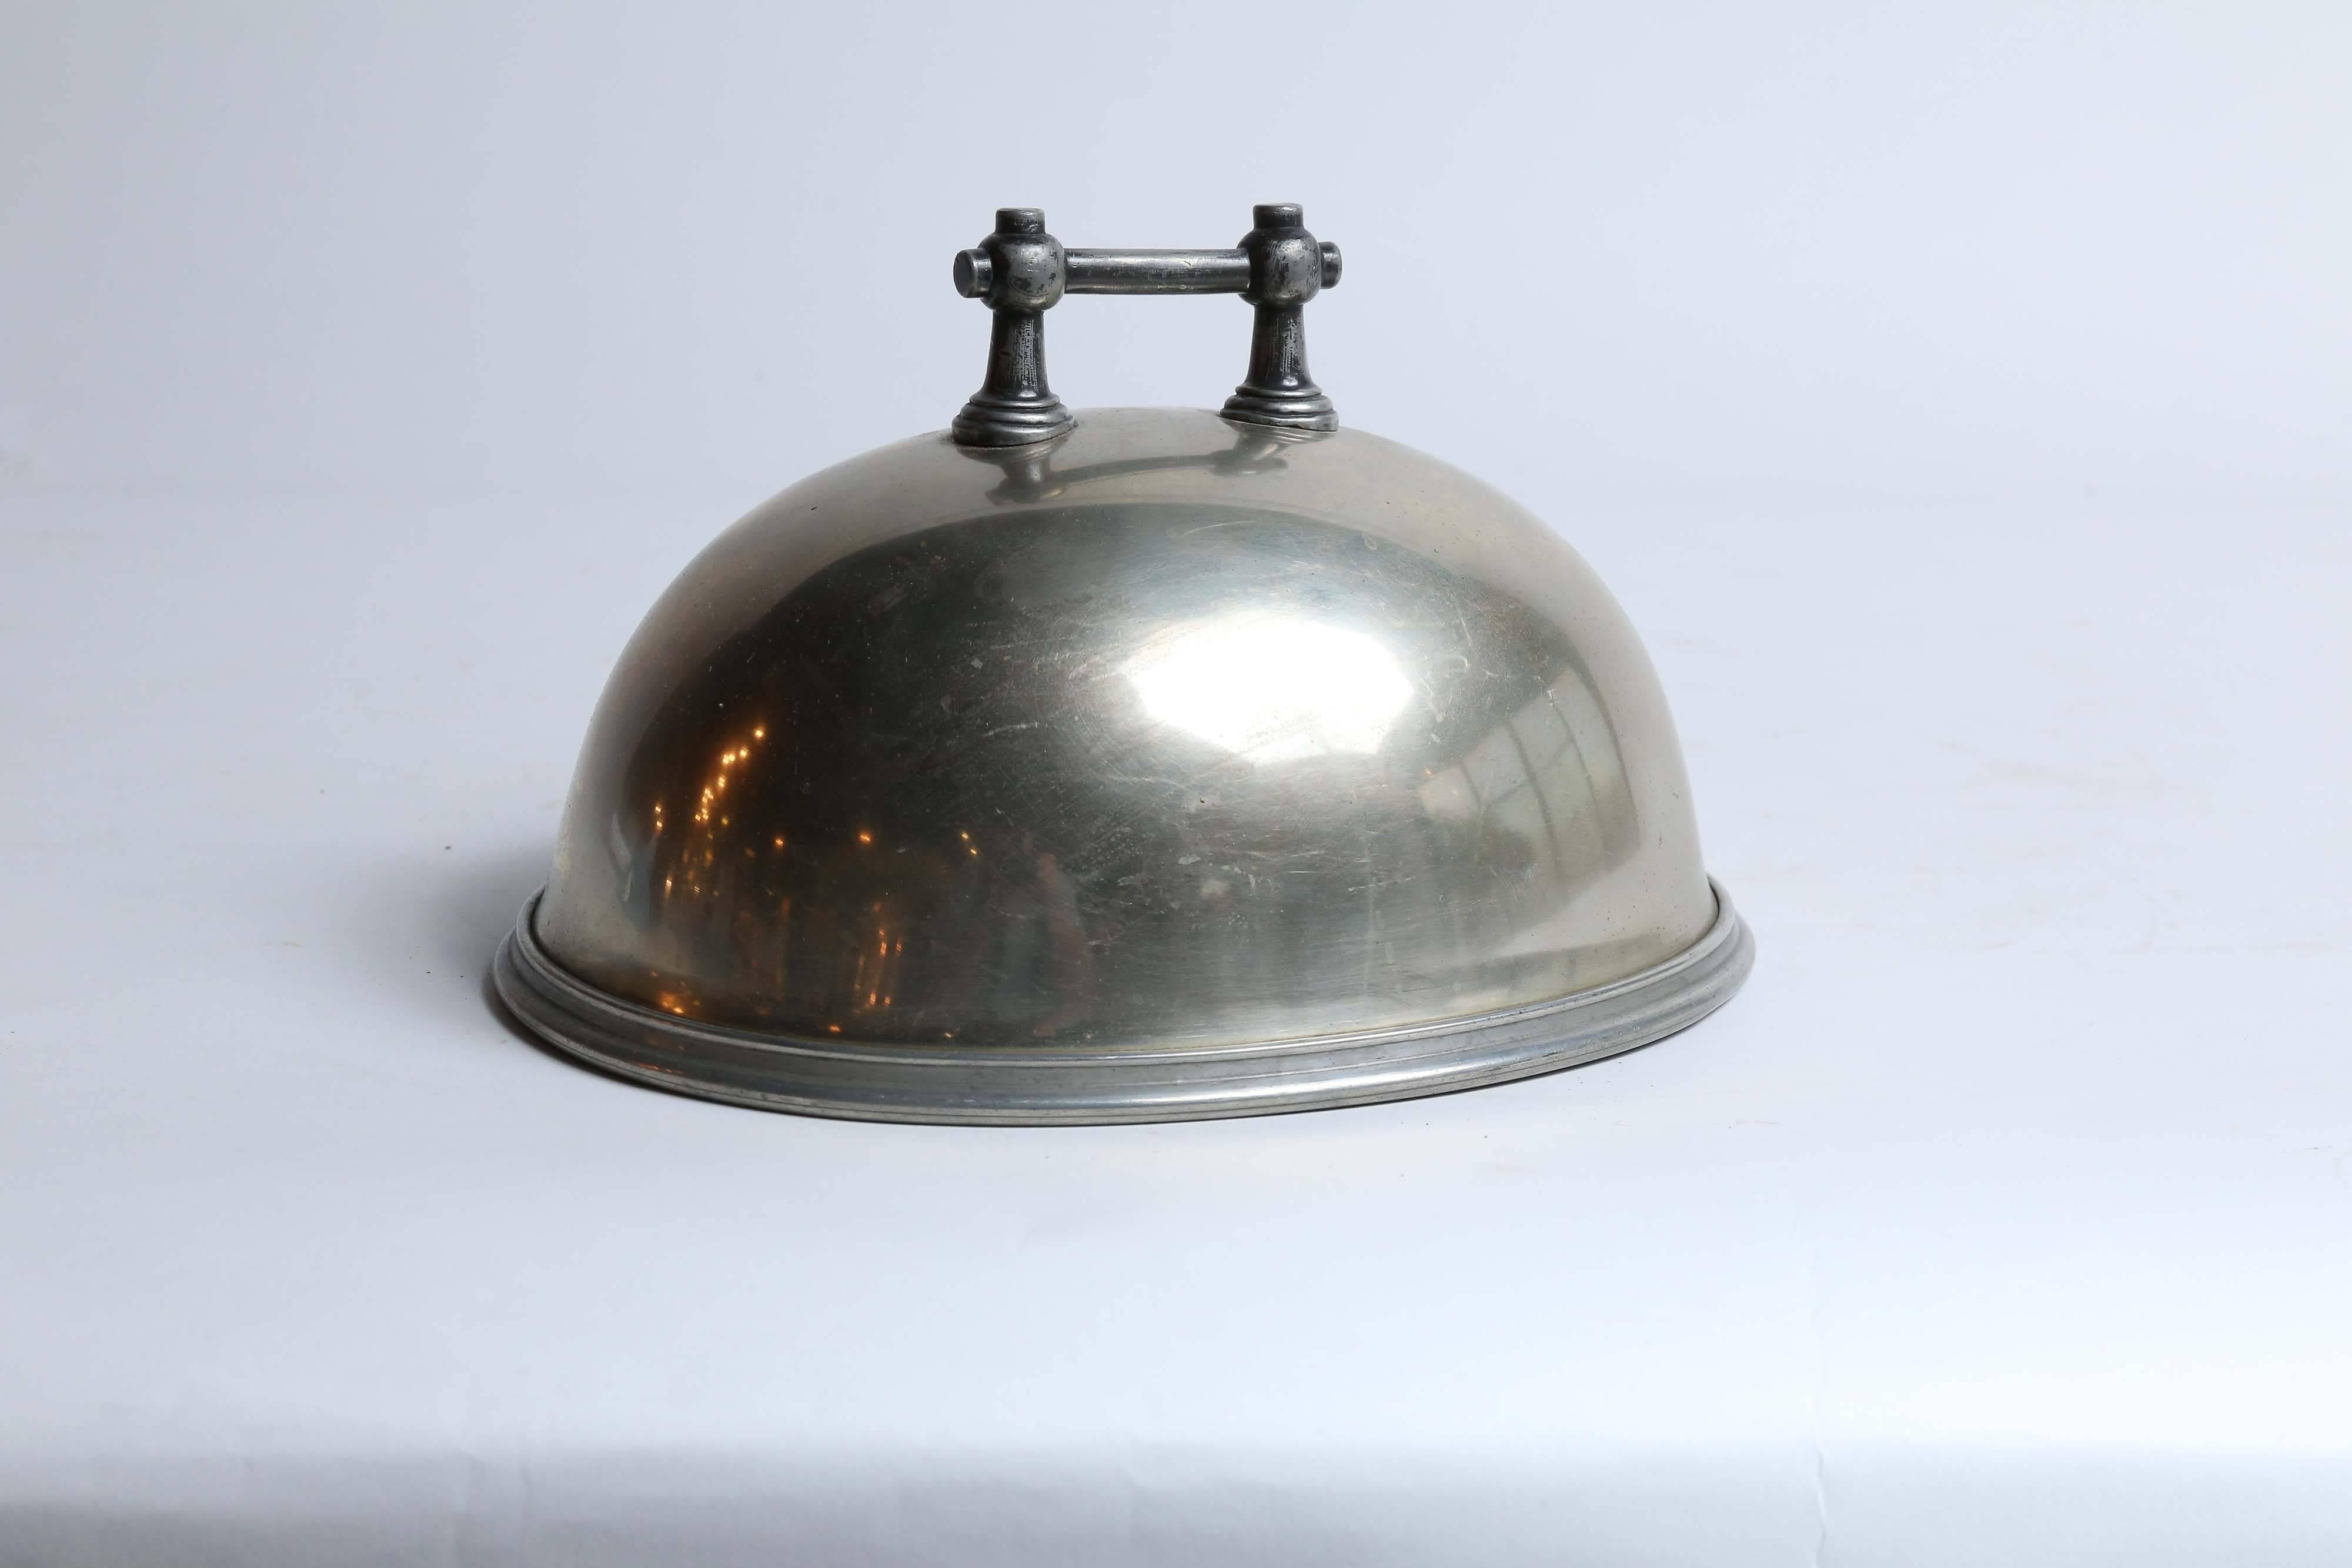 An unusual vintage food dome found in France marked 'Solid Argent Metal' with the makers mark as pictured. Beautiful patina with minor wear as expected.